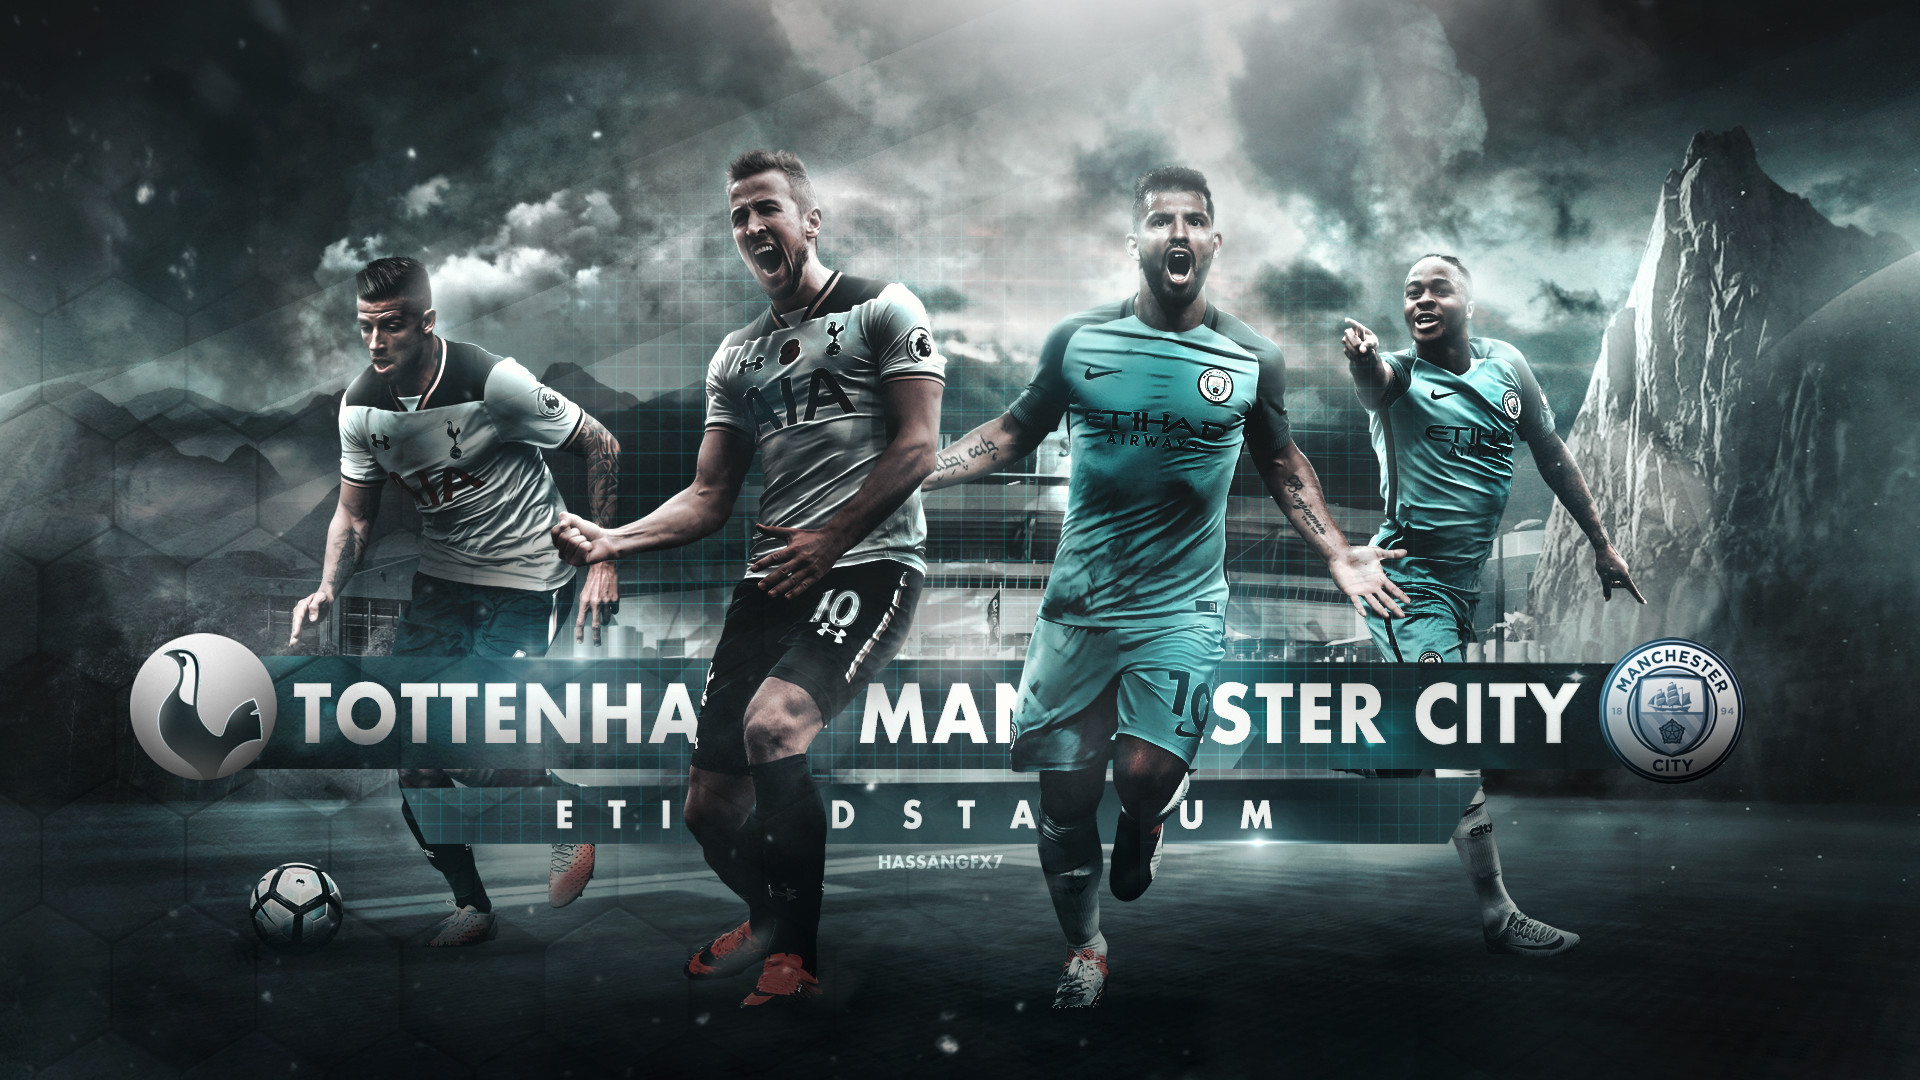 1920x1080 Backgrounds Of Manchester City Tottenham Matchday Wallpaper By .